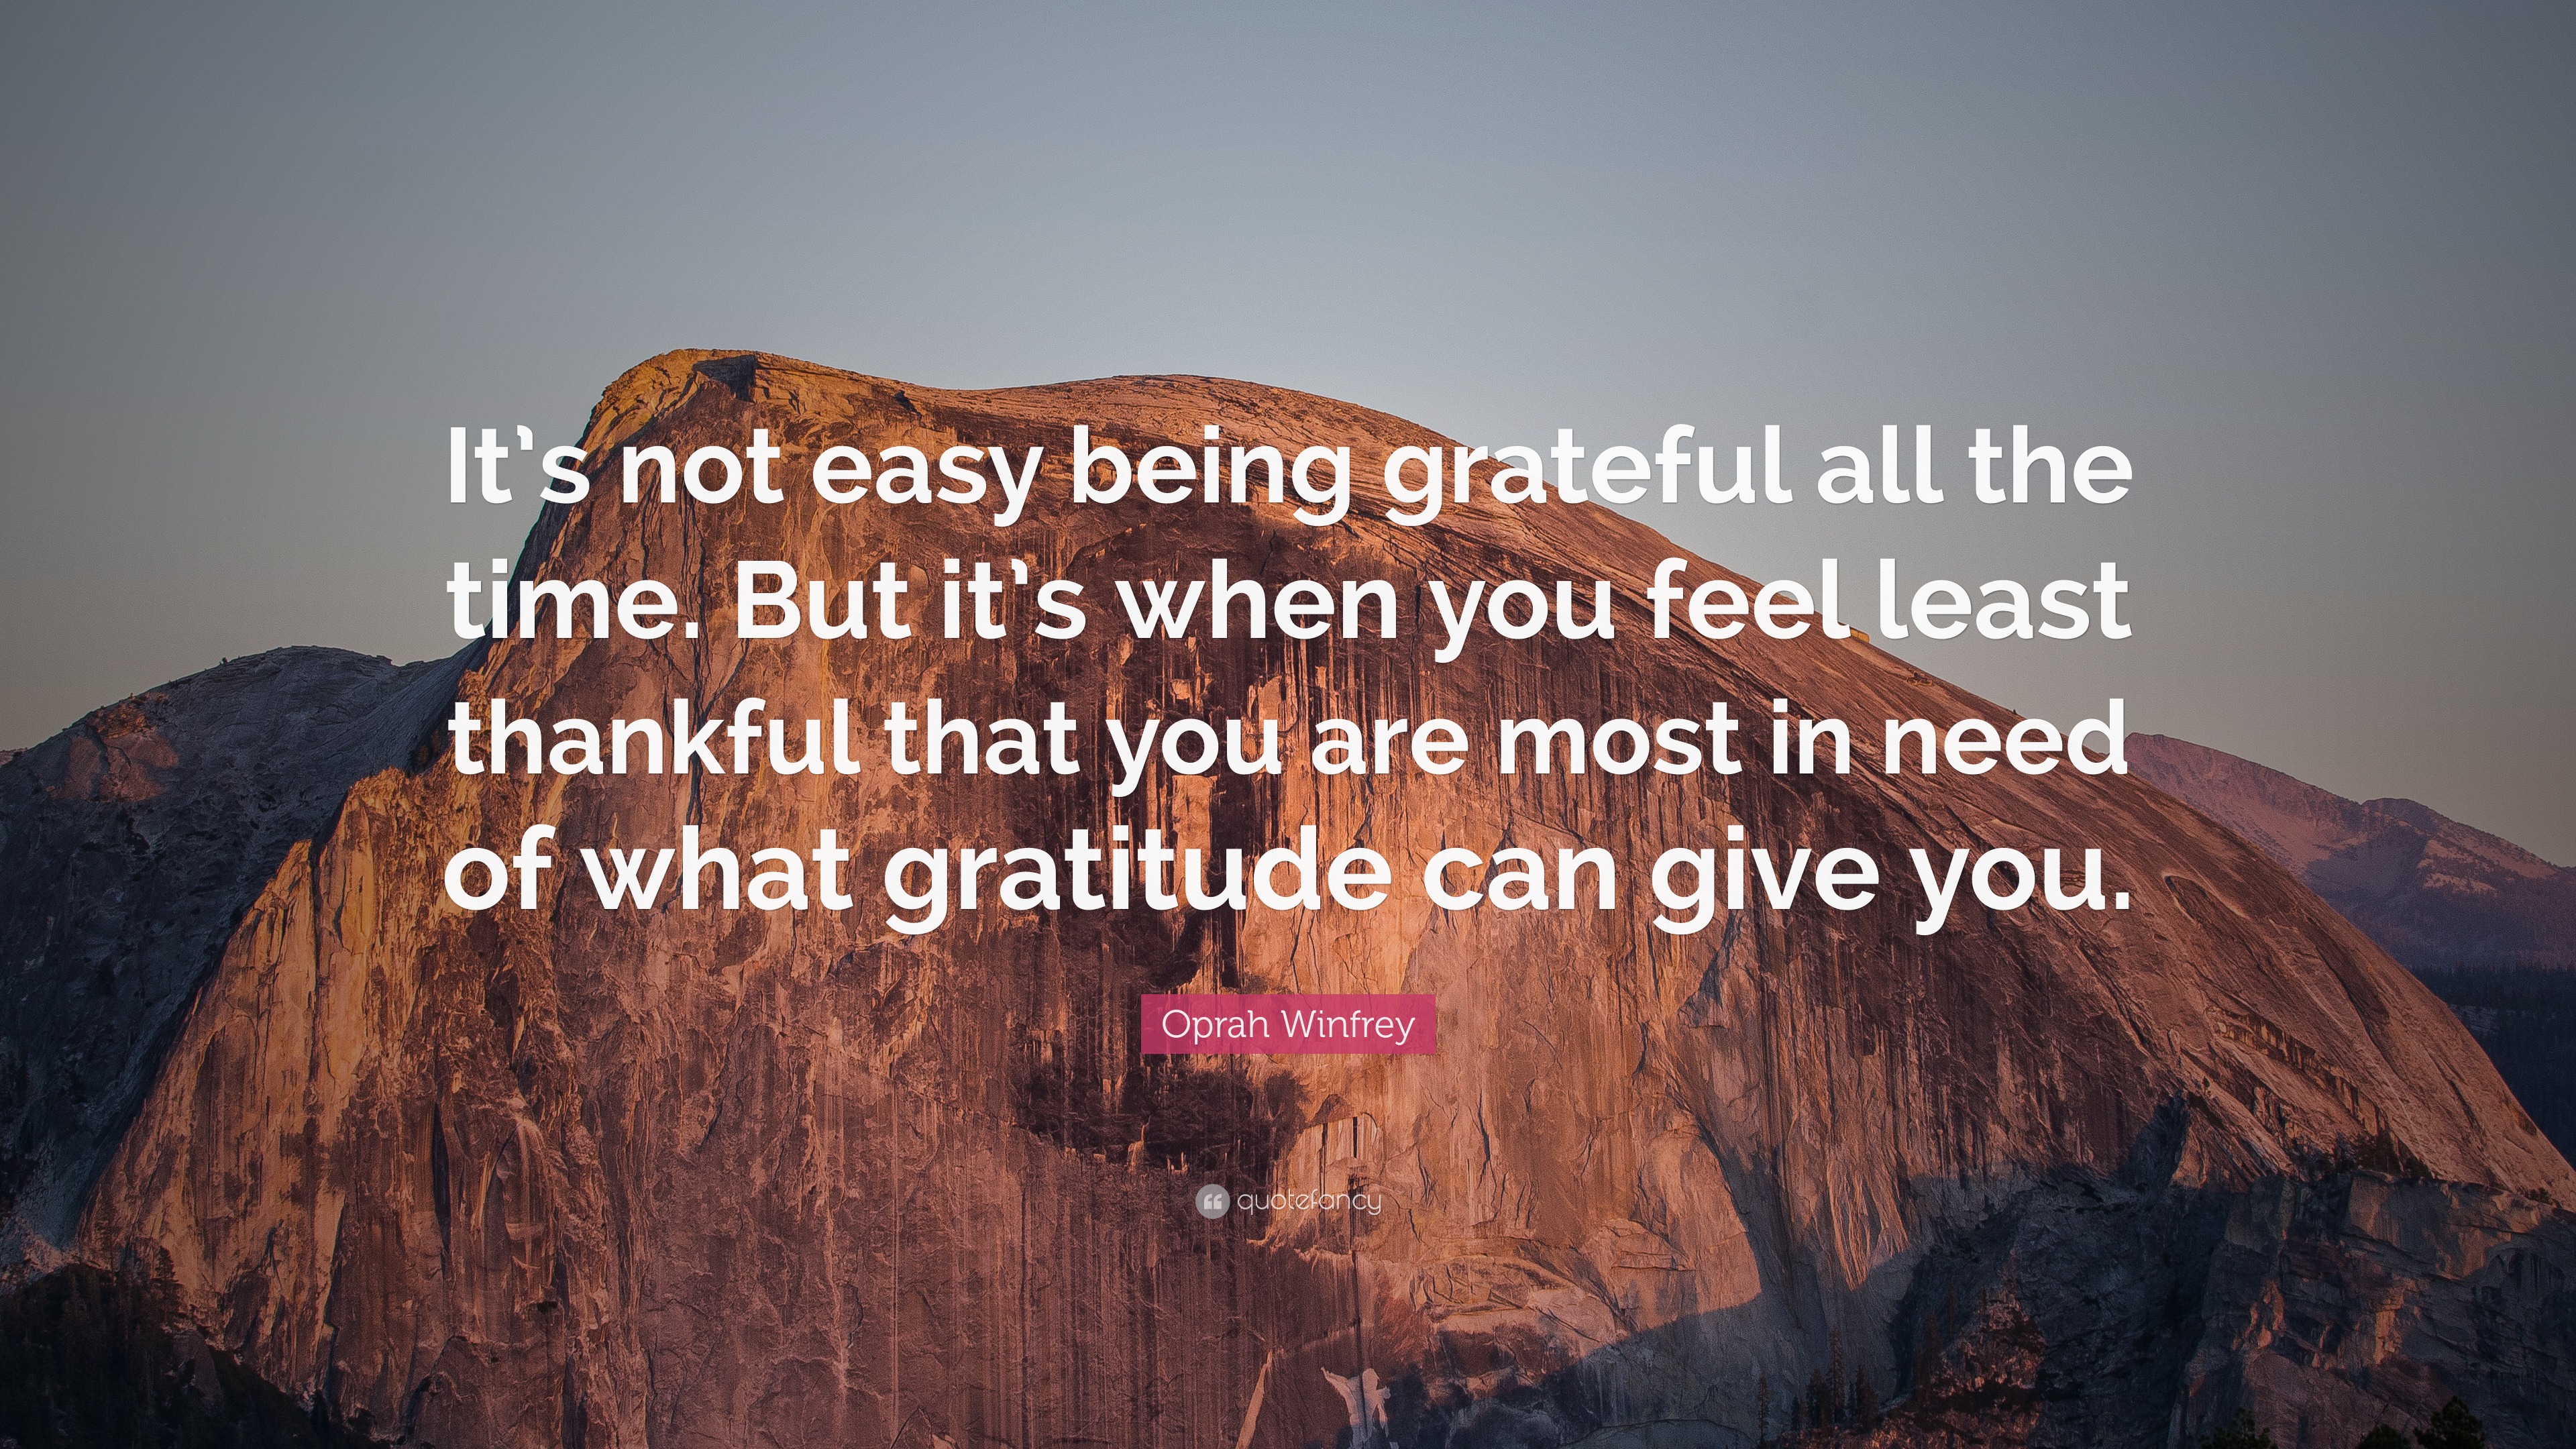 Be Grateful. Not Just In Good Times, But At All Times.